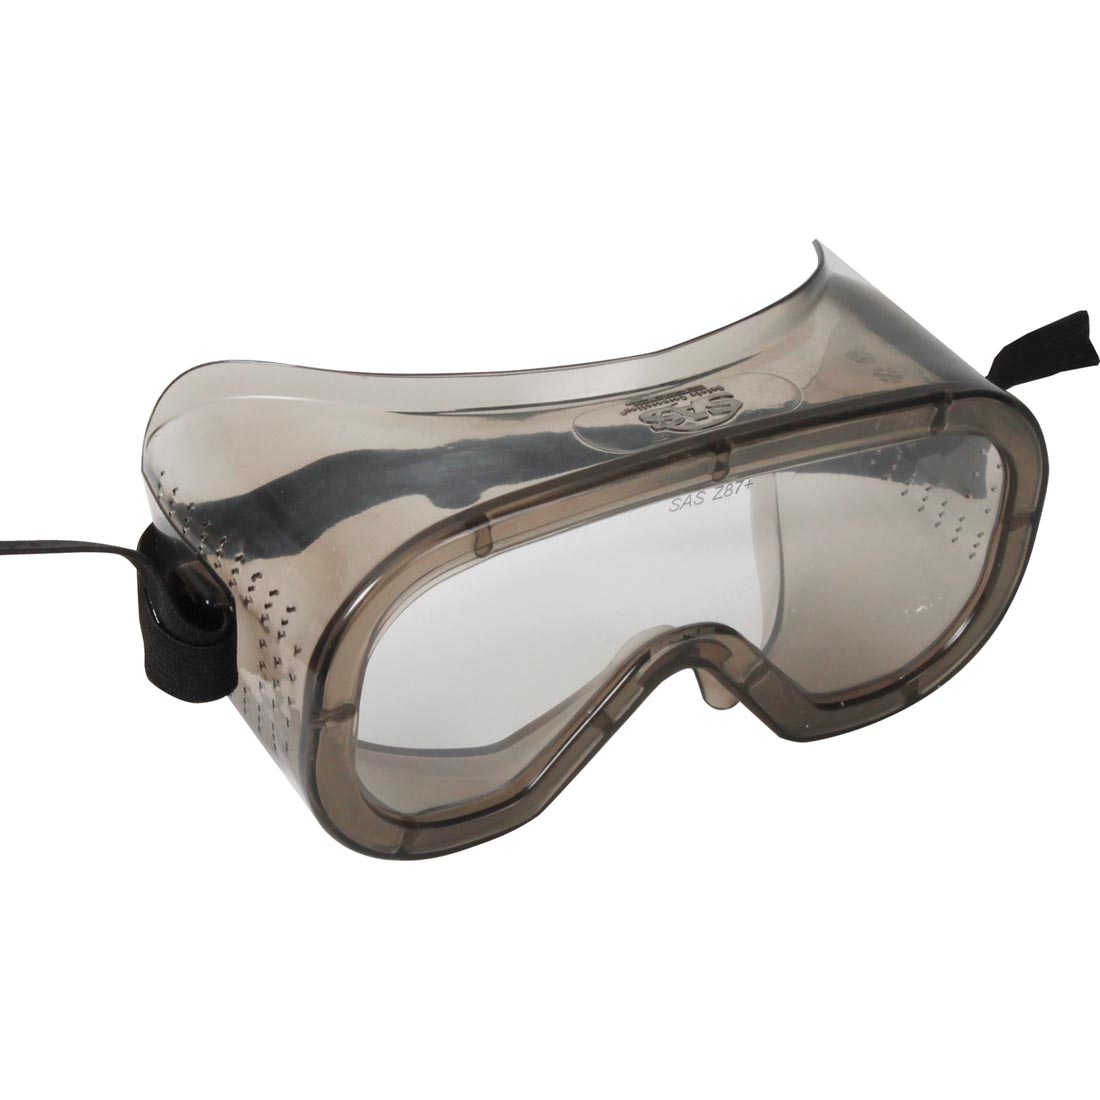 Standard Safety Goggles by SAS Safety